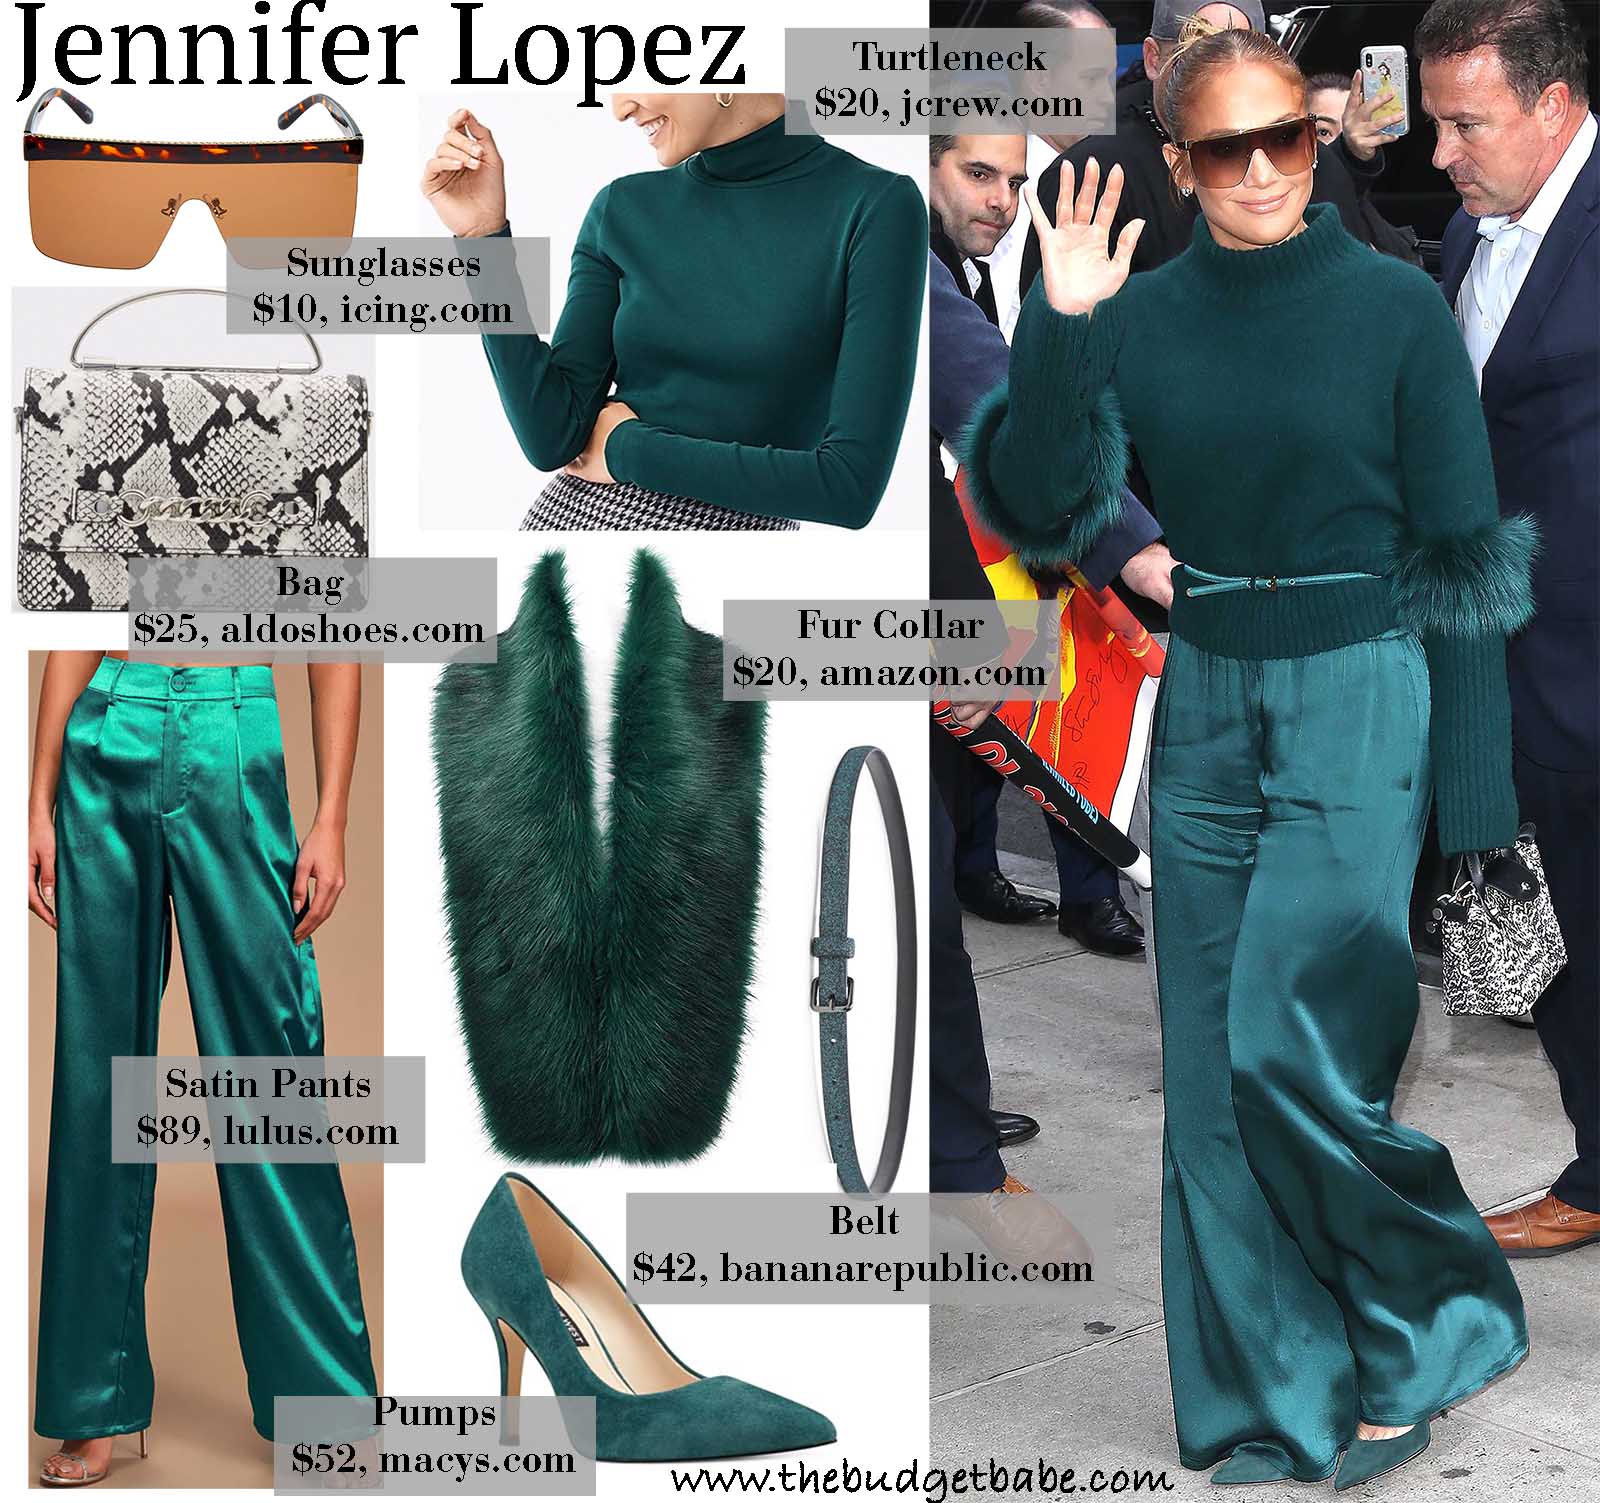 Jlo looks perfect in all green!